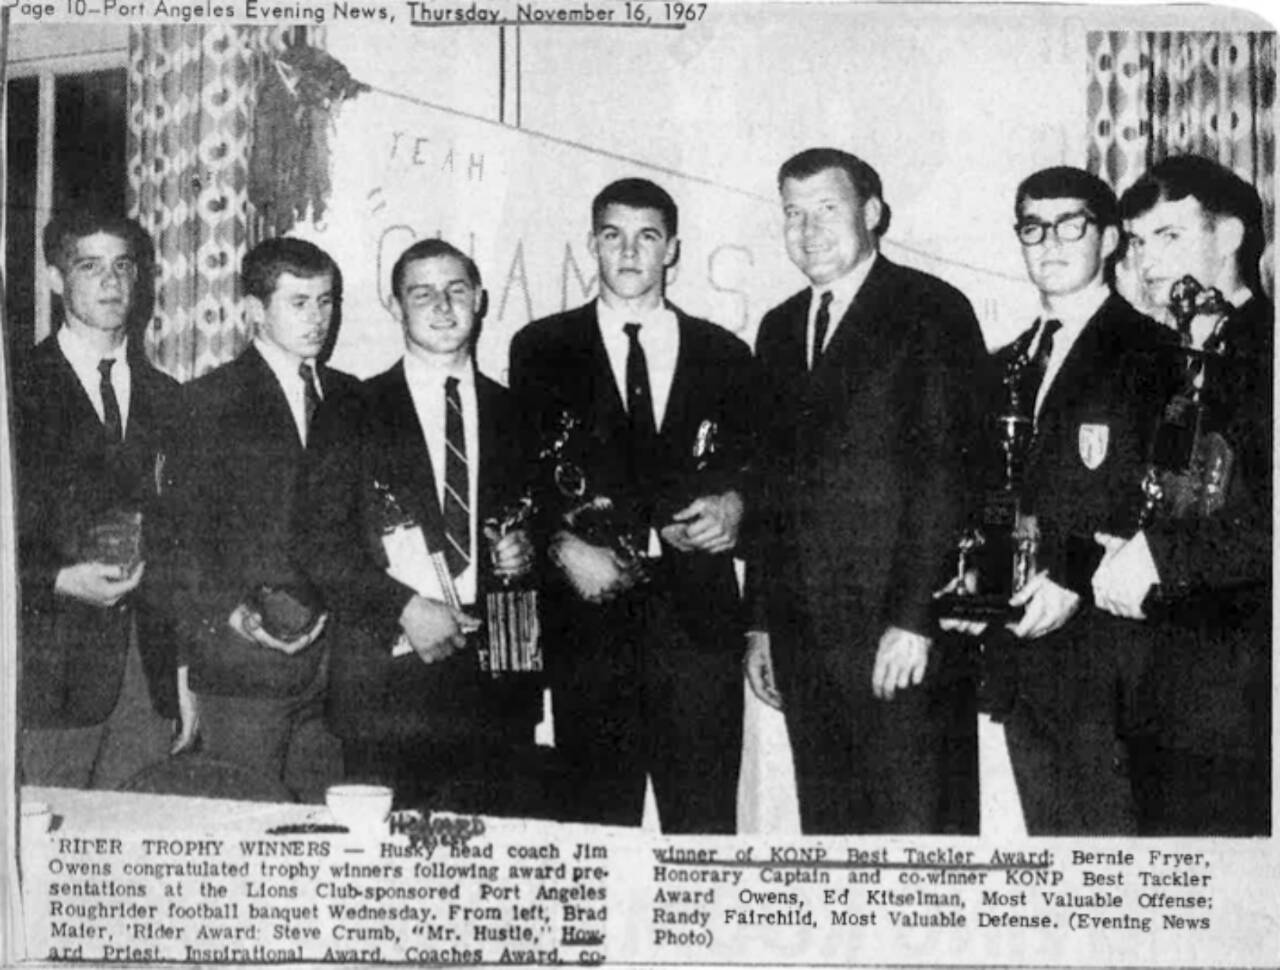 Leaders of the unbeaten 1967 Roughriders football team receive honors.